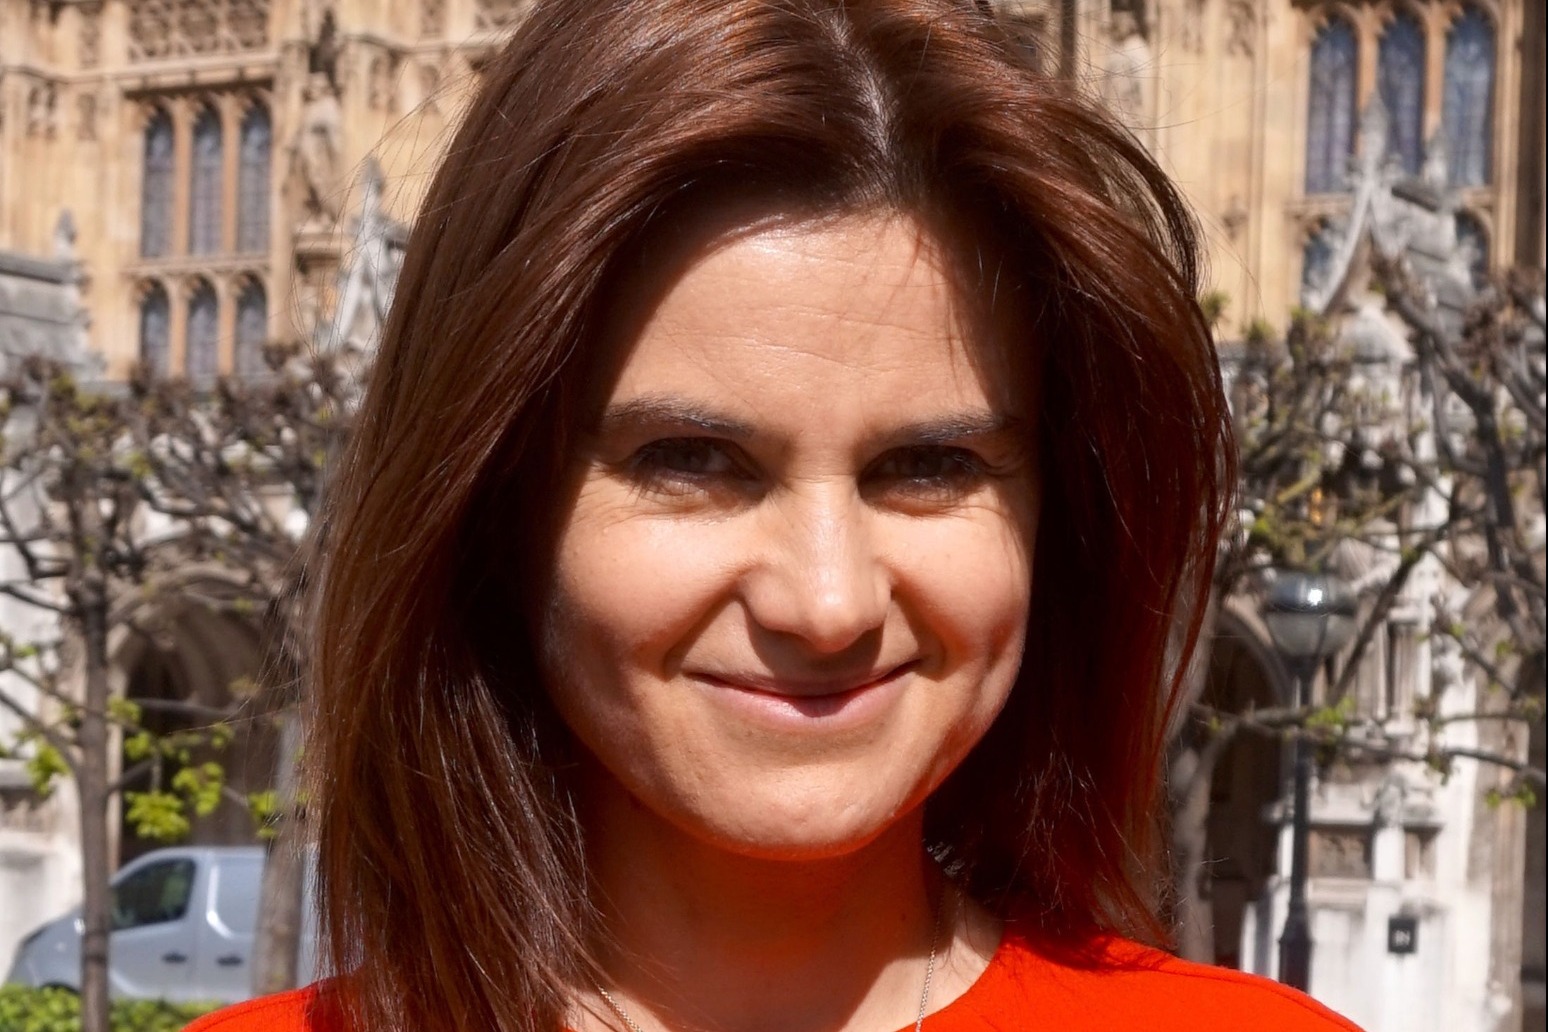 Ban urged of online anonymity to tackle abuse as Jo Cox remembered in Parliament 